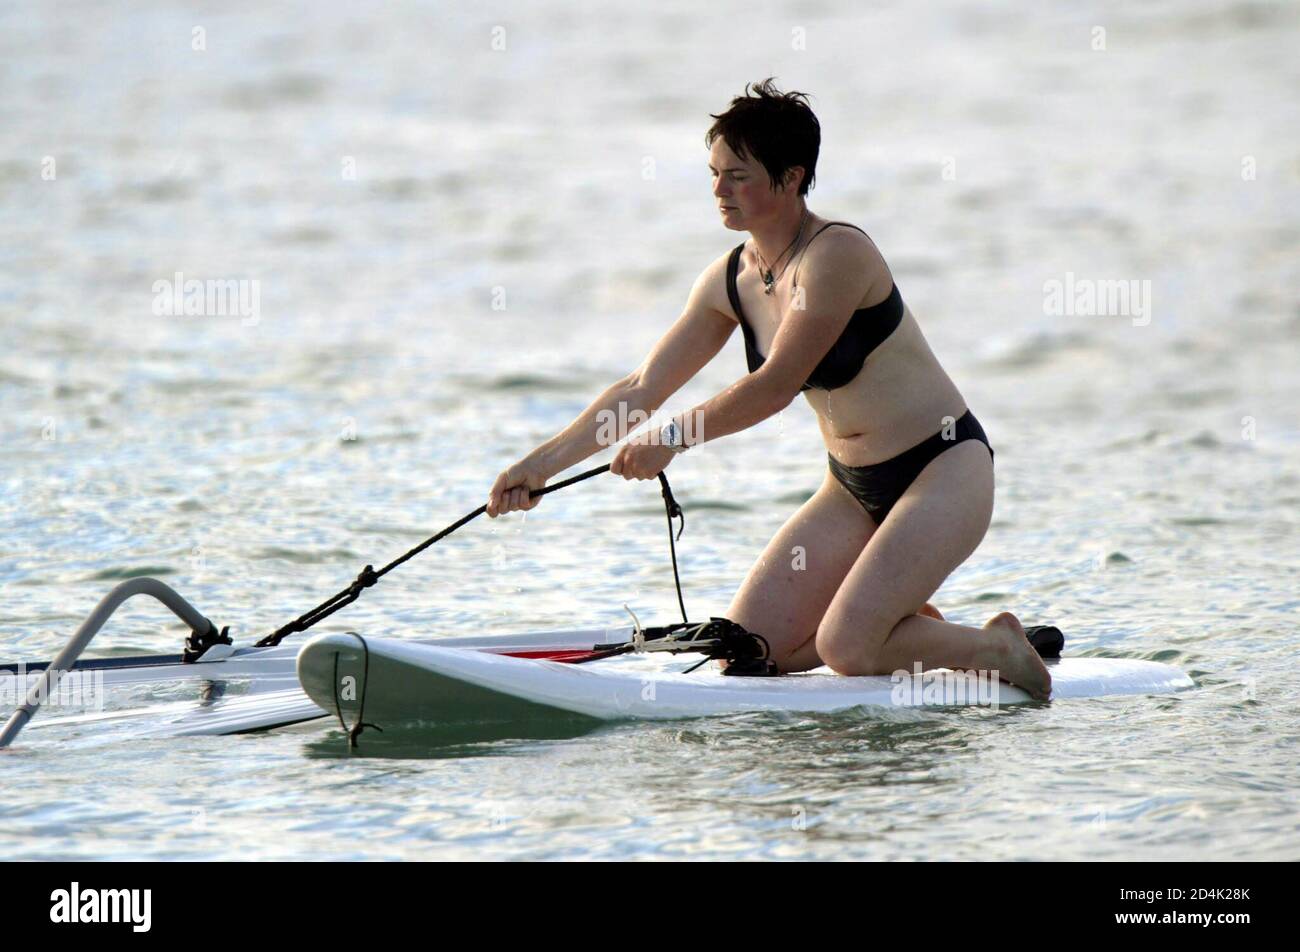 Skipper Ellen MacArthur of England practices winsurfing on a beach at  Pointe-a-Pitre, November 25, 2002. MacArthur won the Route du Rhum sailing  race November 19th in the monohull class in the seventh